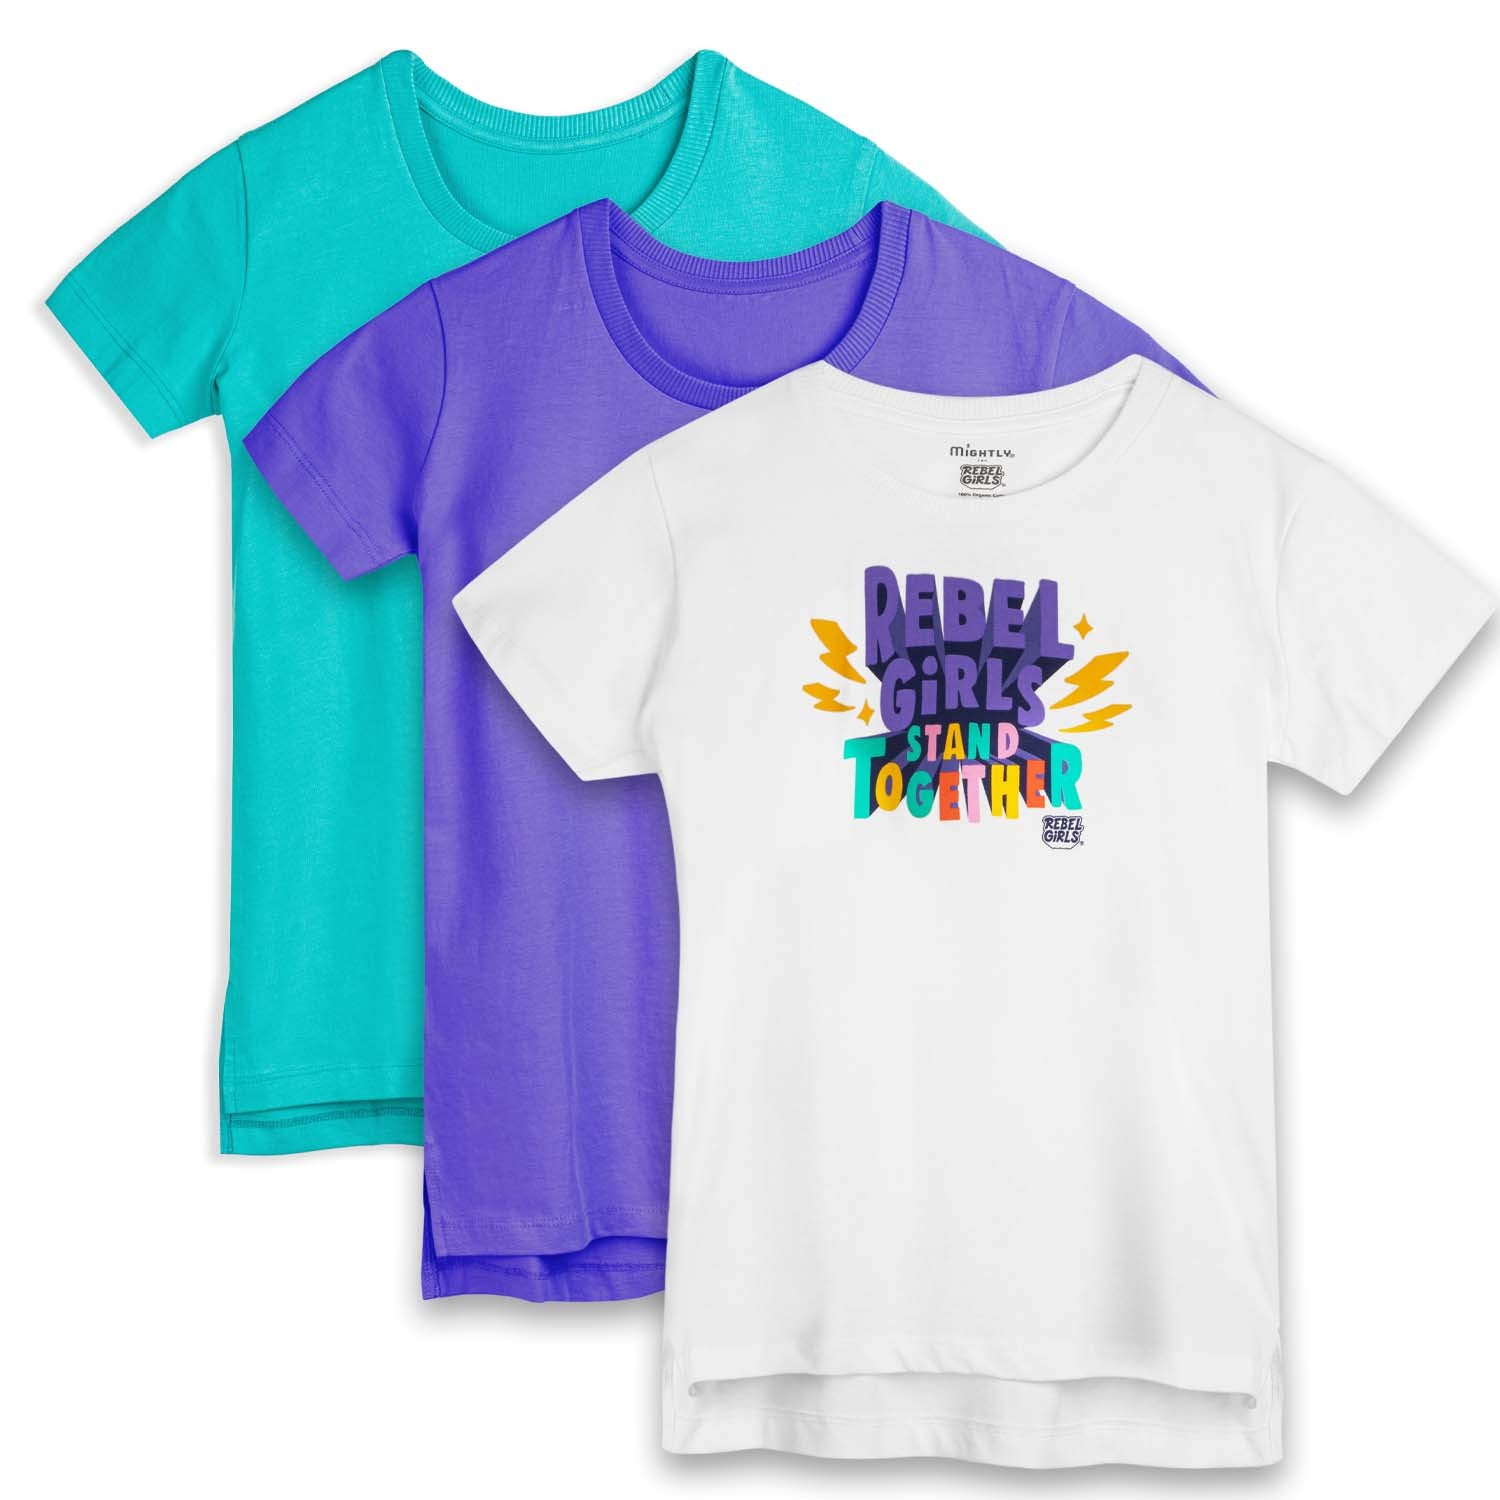 Pack Extended Kids Length Organic Mightly Cotton - T-Shirts 3 - Shirts